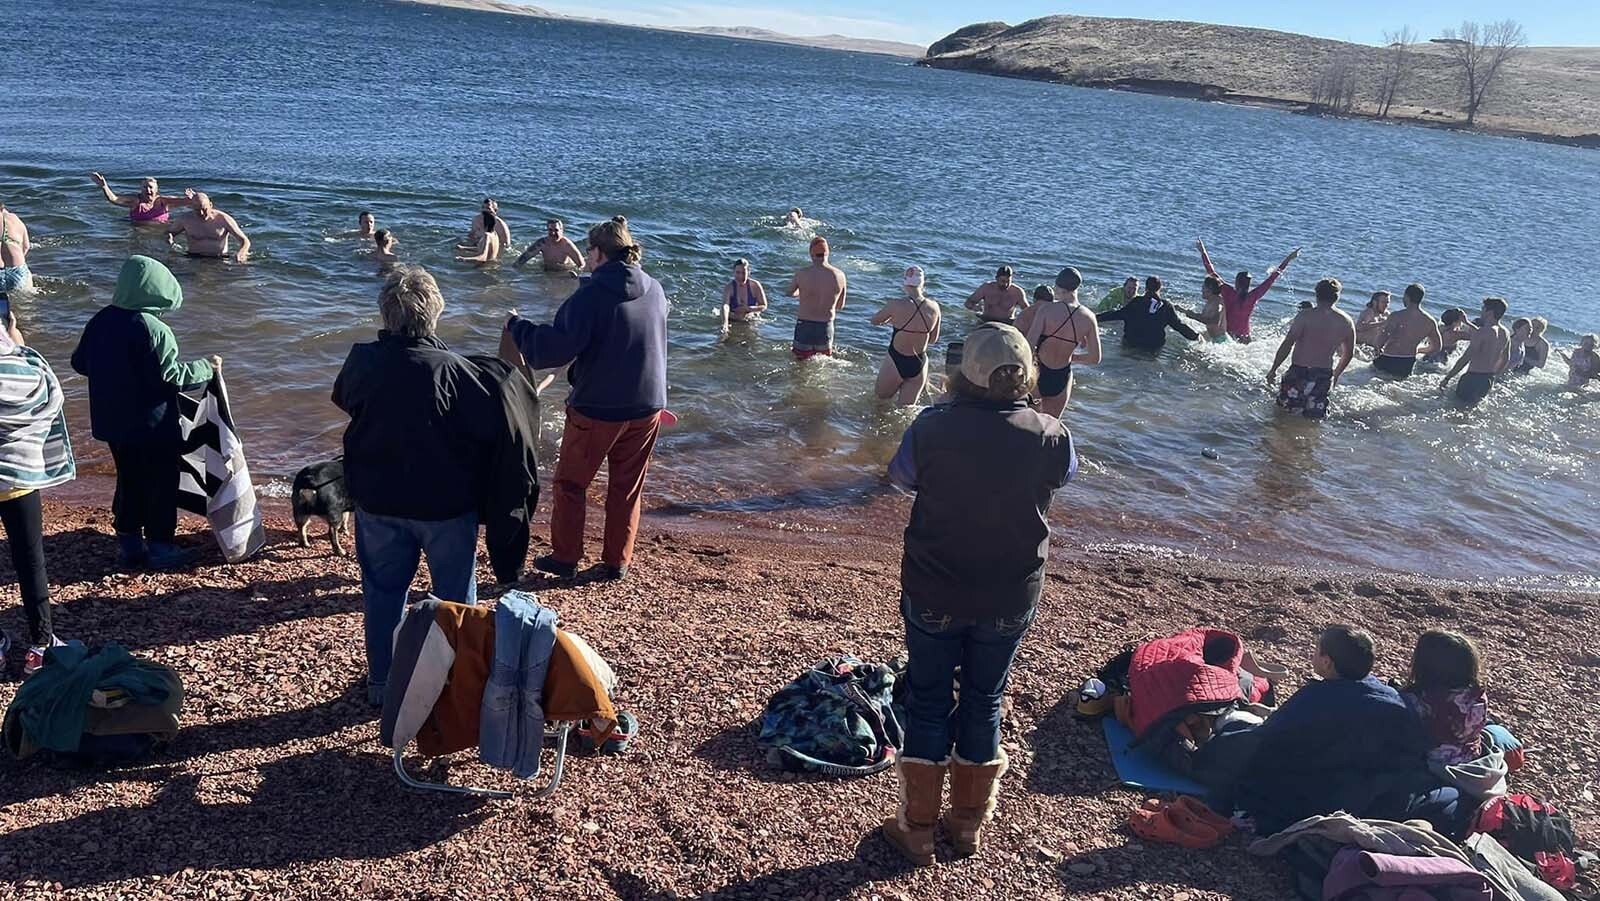 Not everyone takes the plunge during the annual Lake De Smet Polar Plunge on New Year's Day. A few like to watch and take photos of the occasion And hold up dry towels for those exiting the cold water.